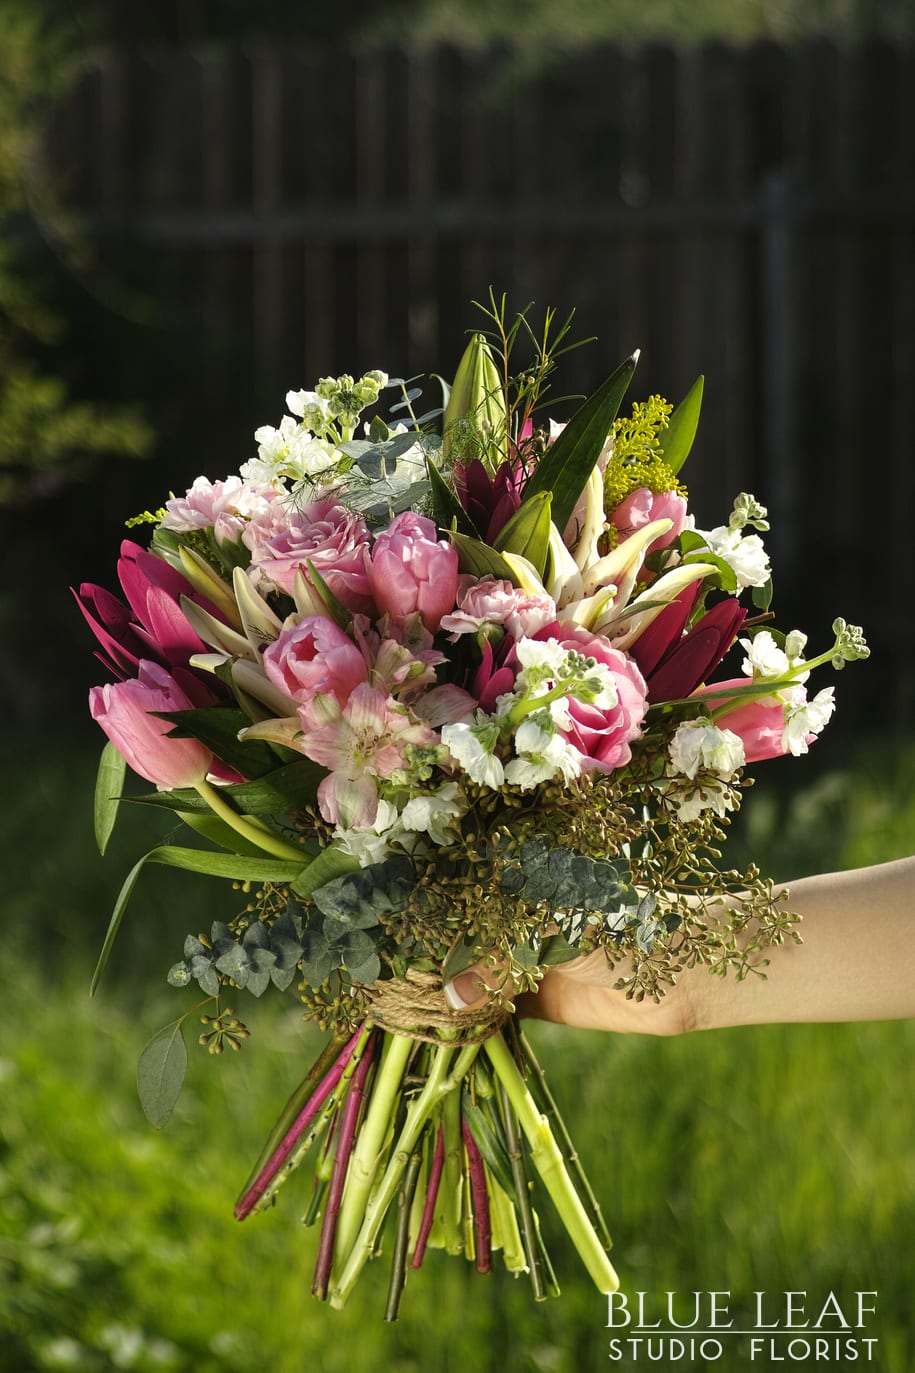 Custom hand-held bouquet with an assortment of pink and white; includes tulips